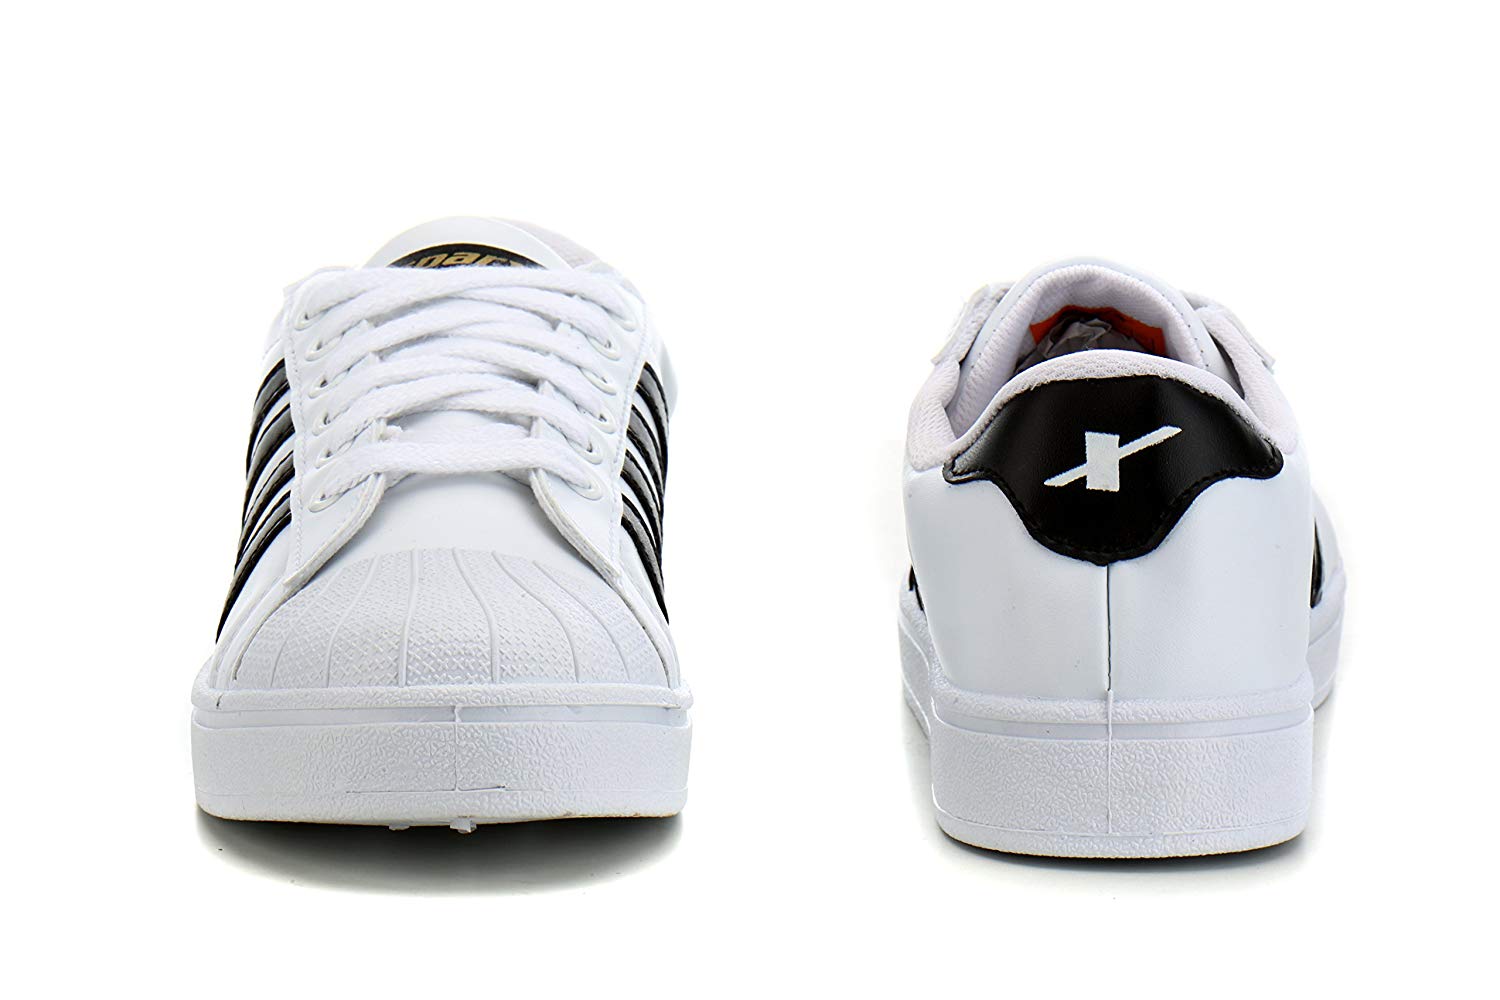 sparx casual white shoes